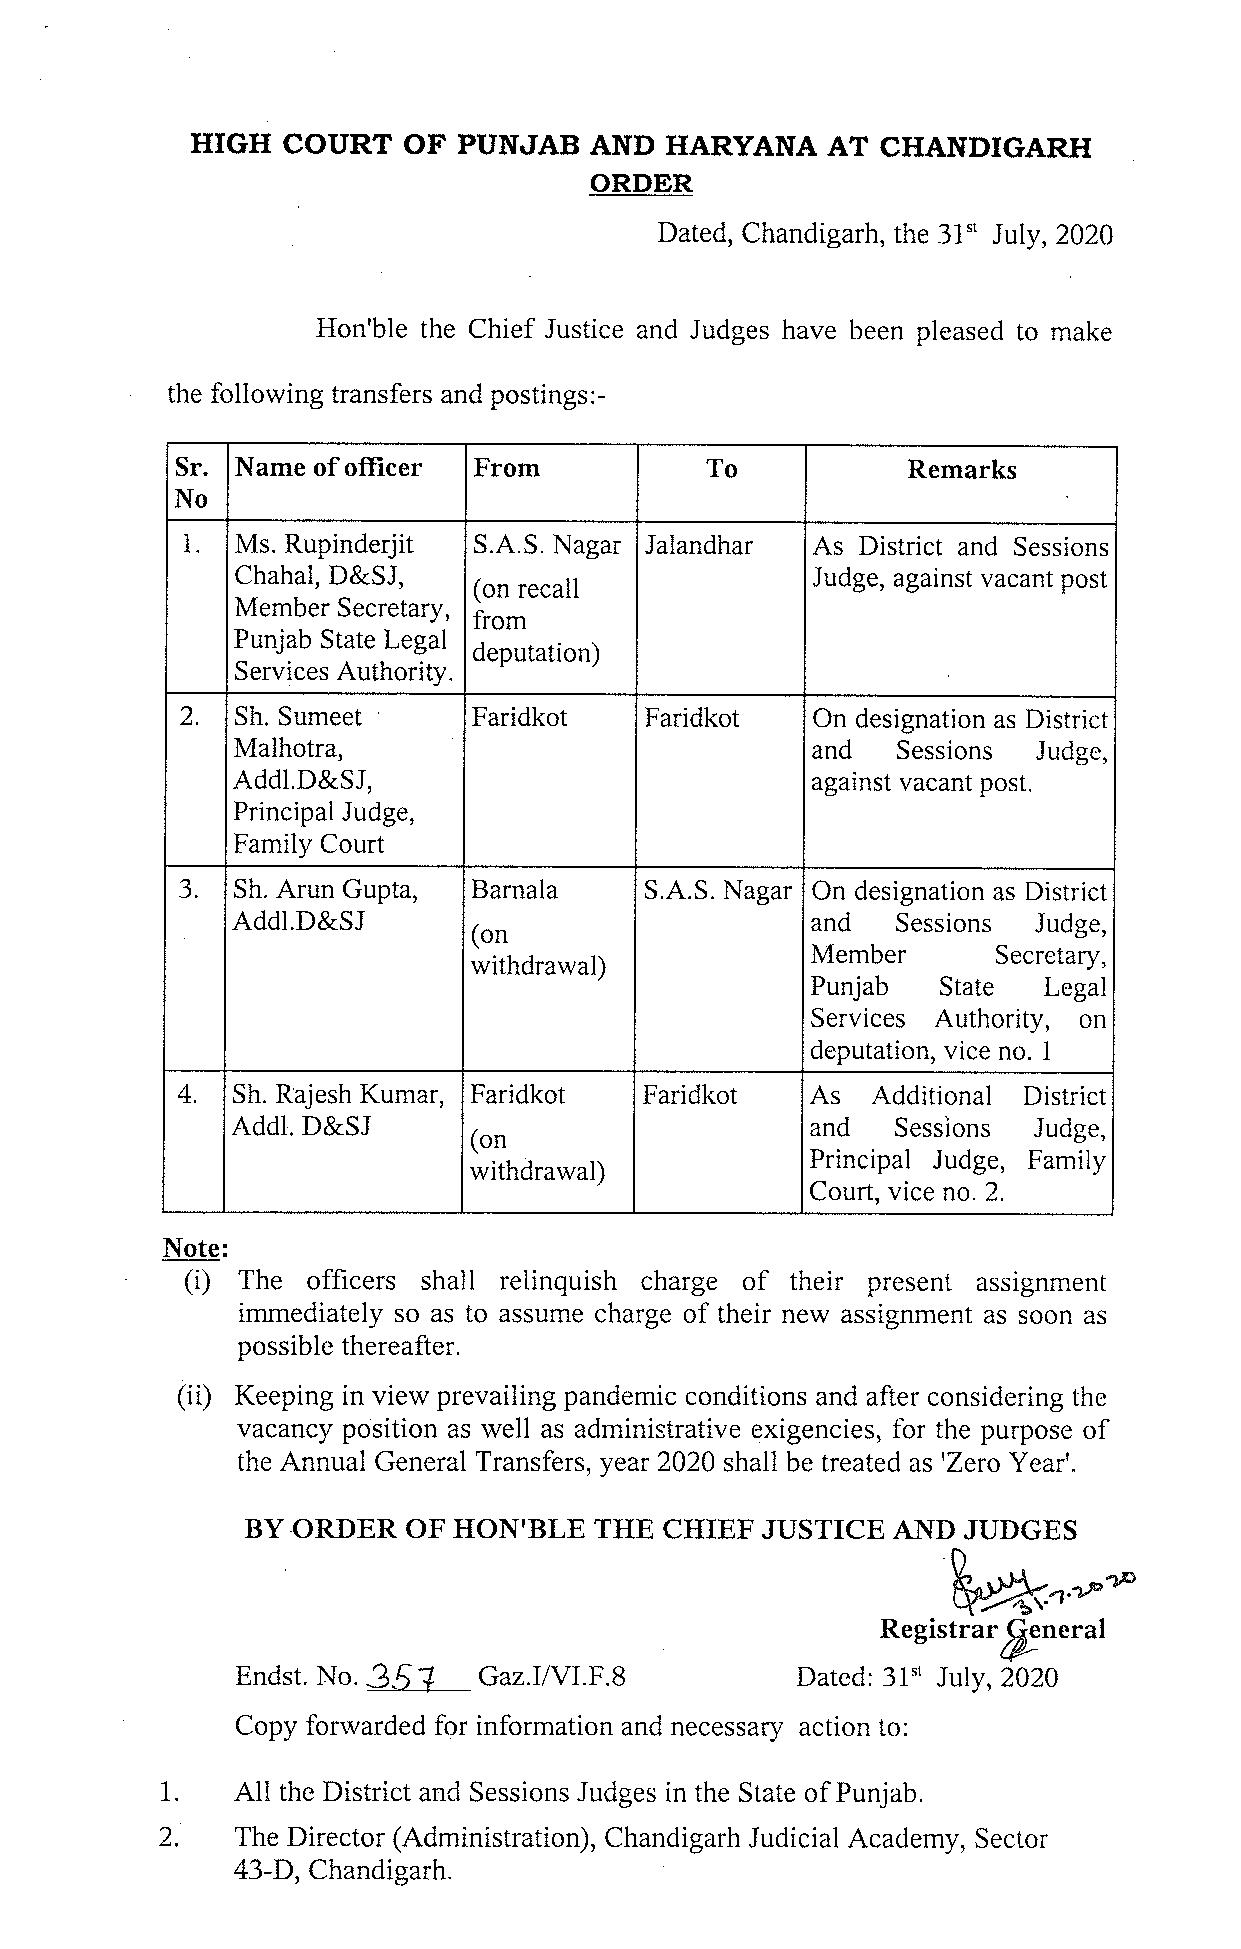 Punjab and Haryana high court transferred district & sessions judges